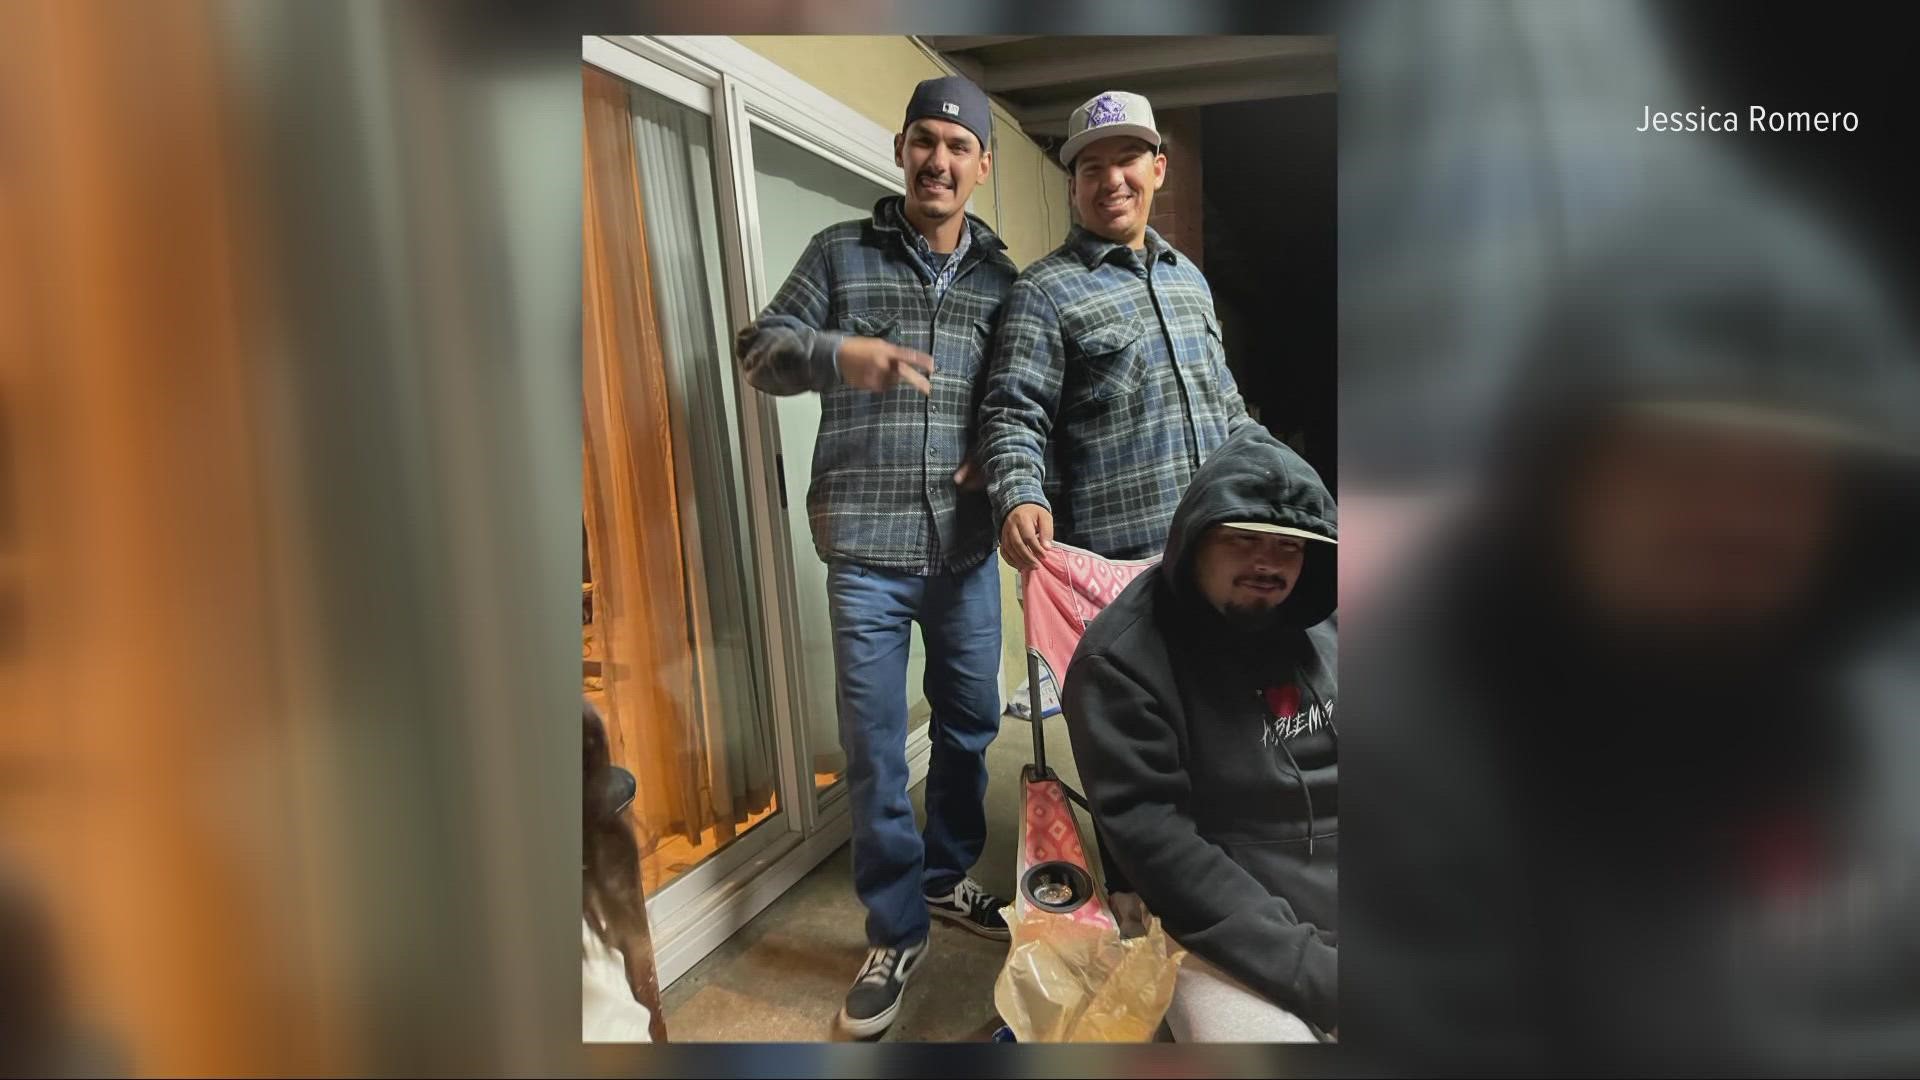 Juan Carlos Rodriguez and his brother Lionel were both killed in an I-5 onramp crash Tuesday, and an on-duty Sacramento officer crashed into the truck.